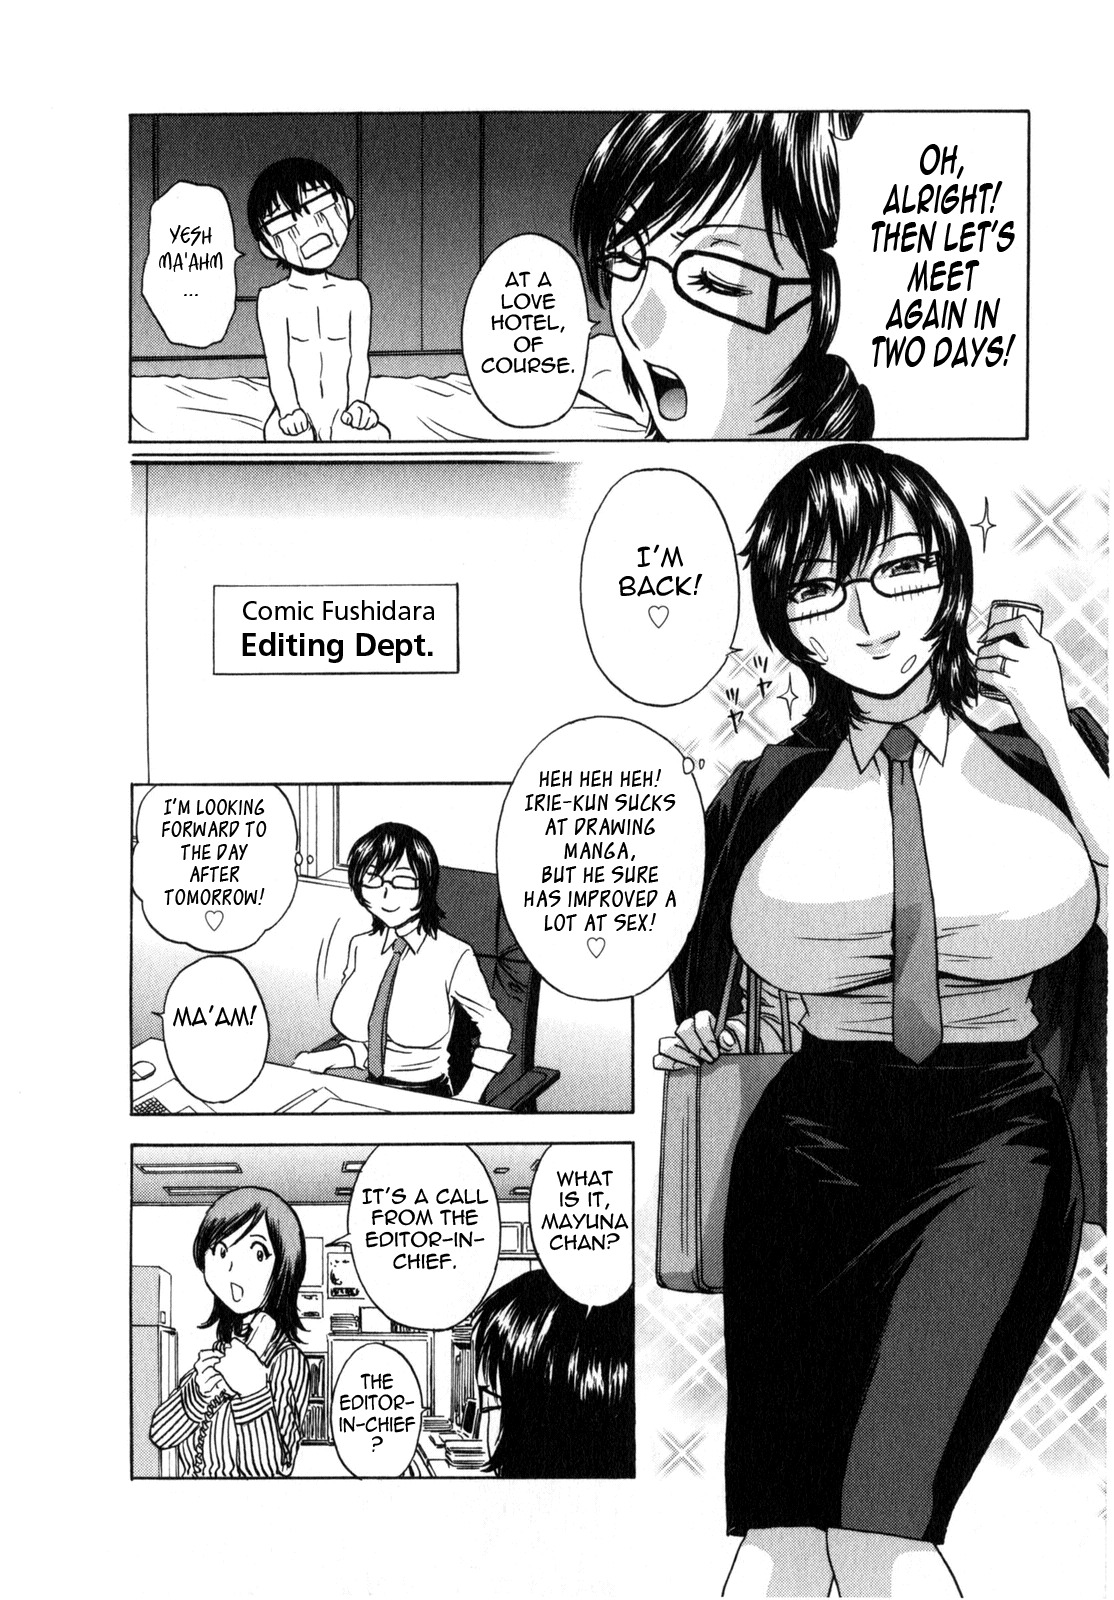 Life with Married Women Just Like a Manga 24 hq image